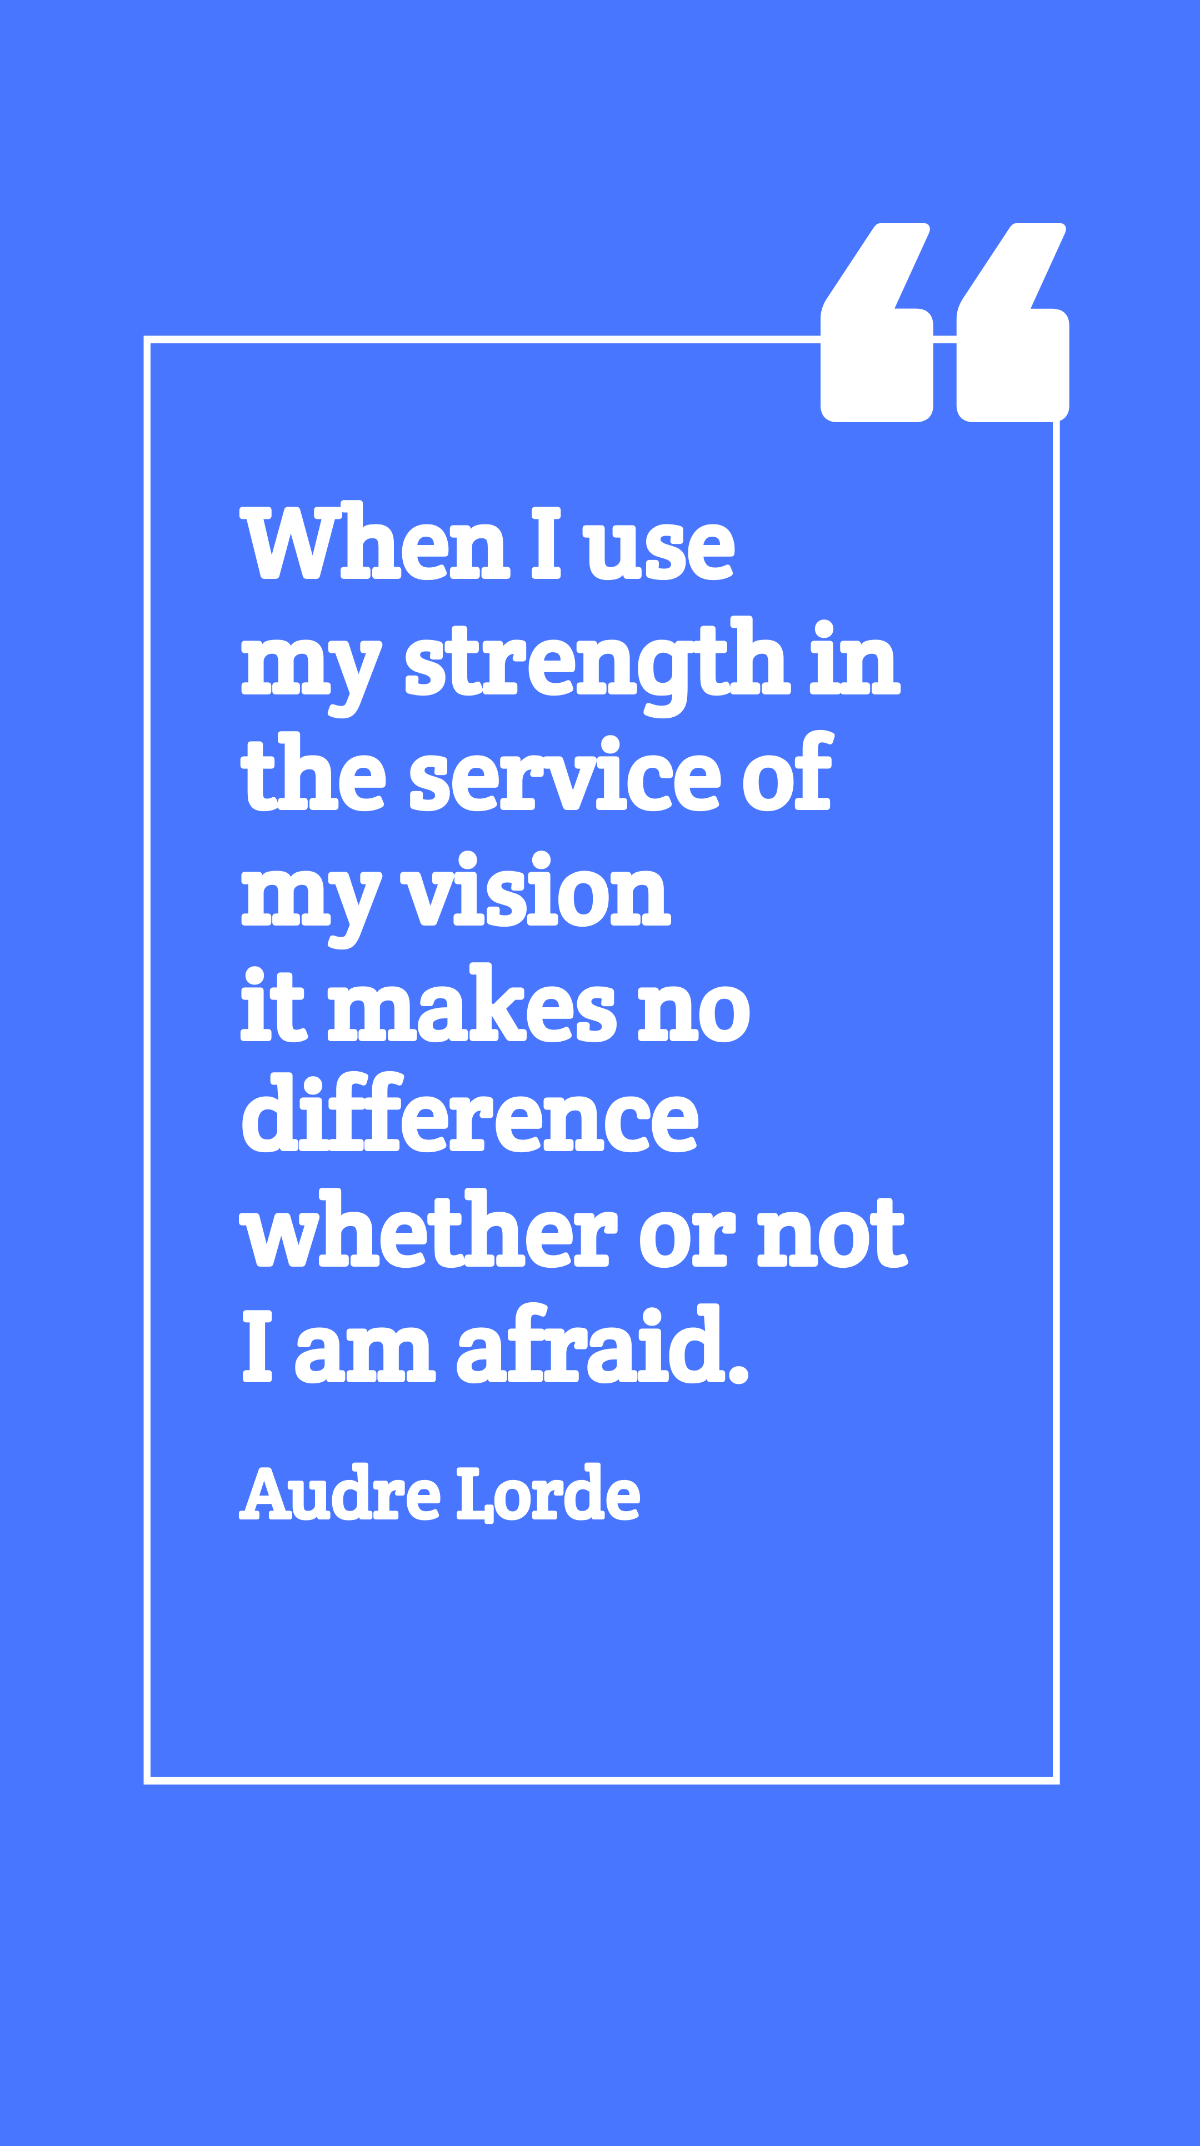 Audre Lorde - When I use my strength in the service of my vision it makes no difference whether or not I am afraid. Template